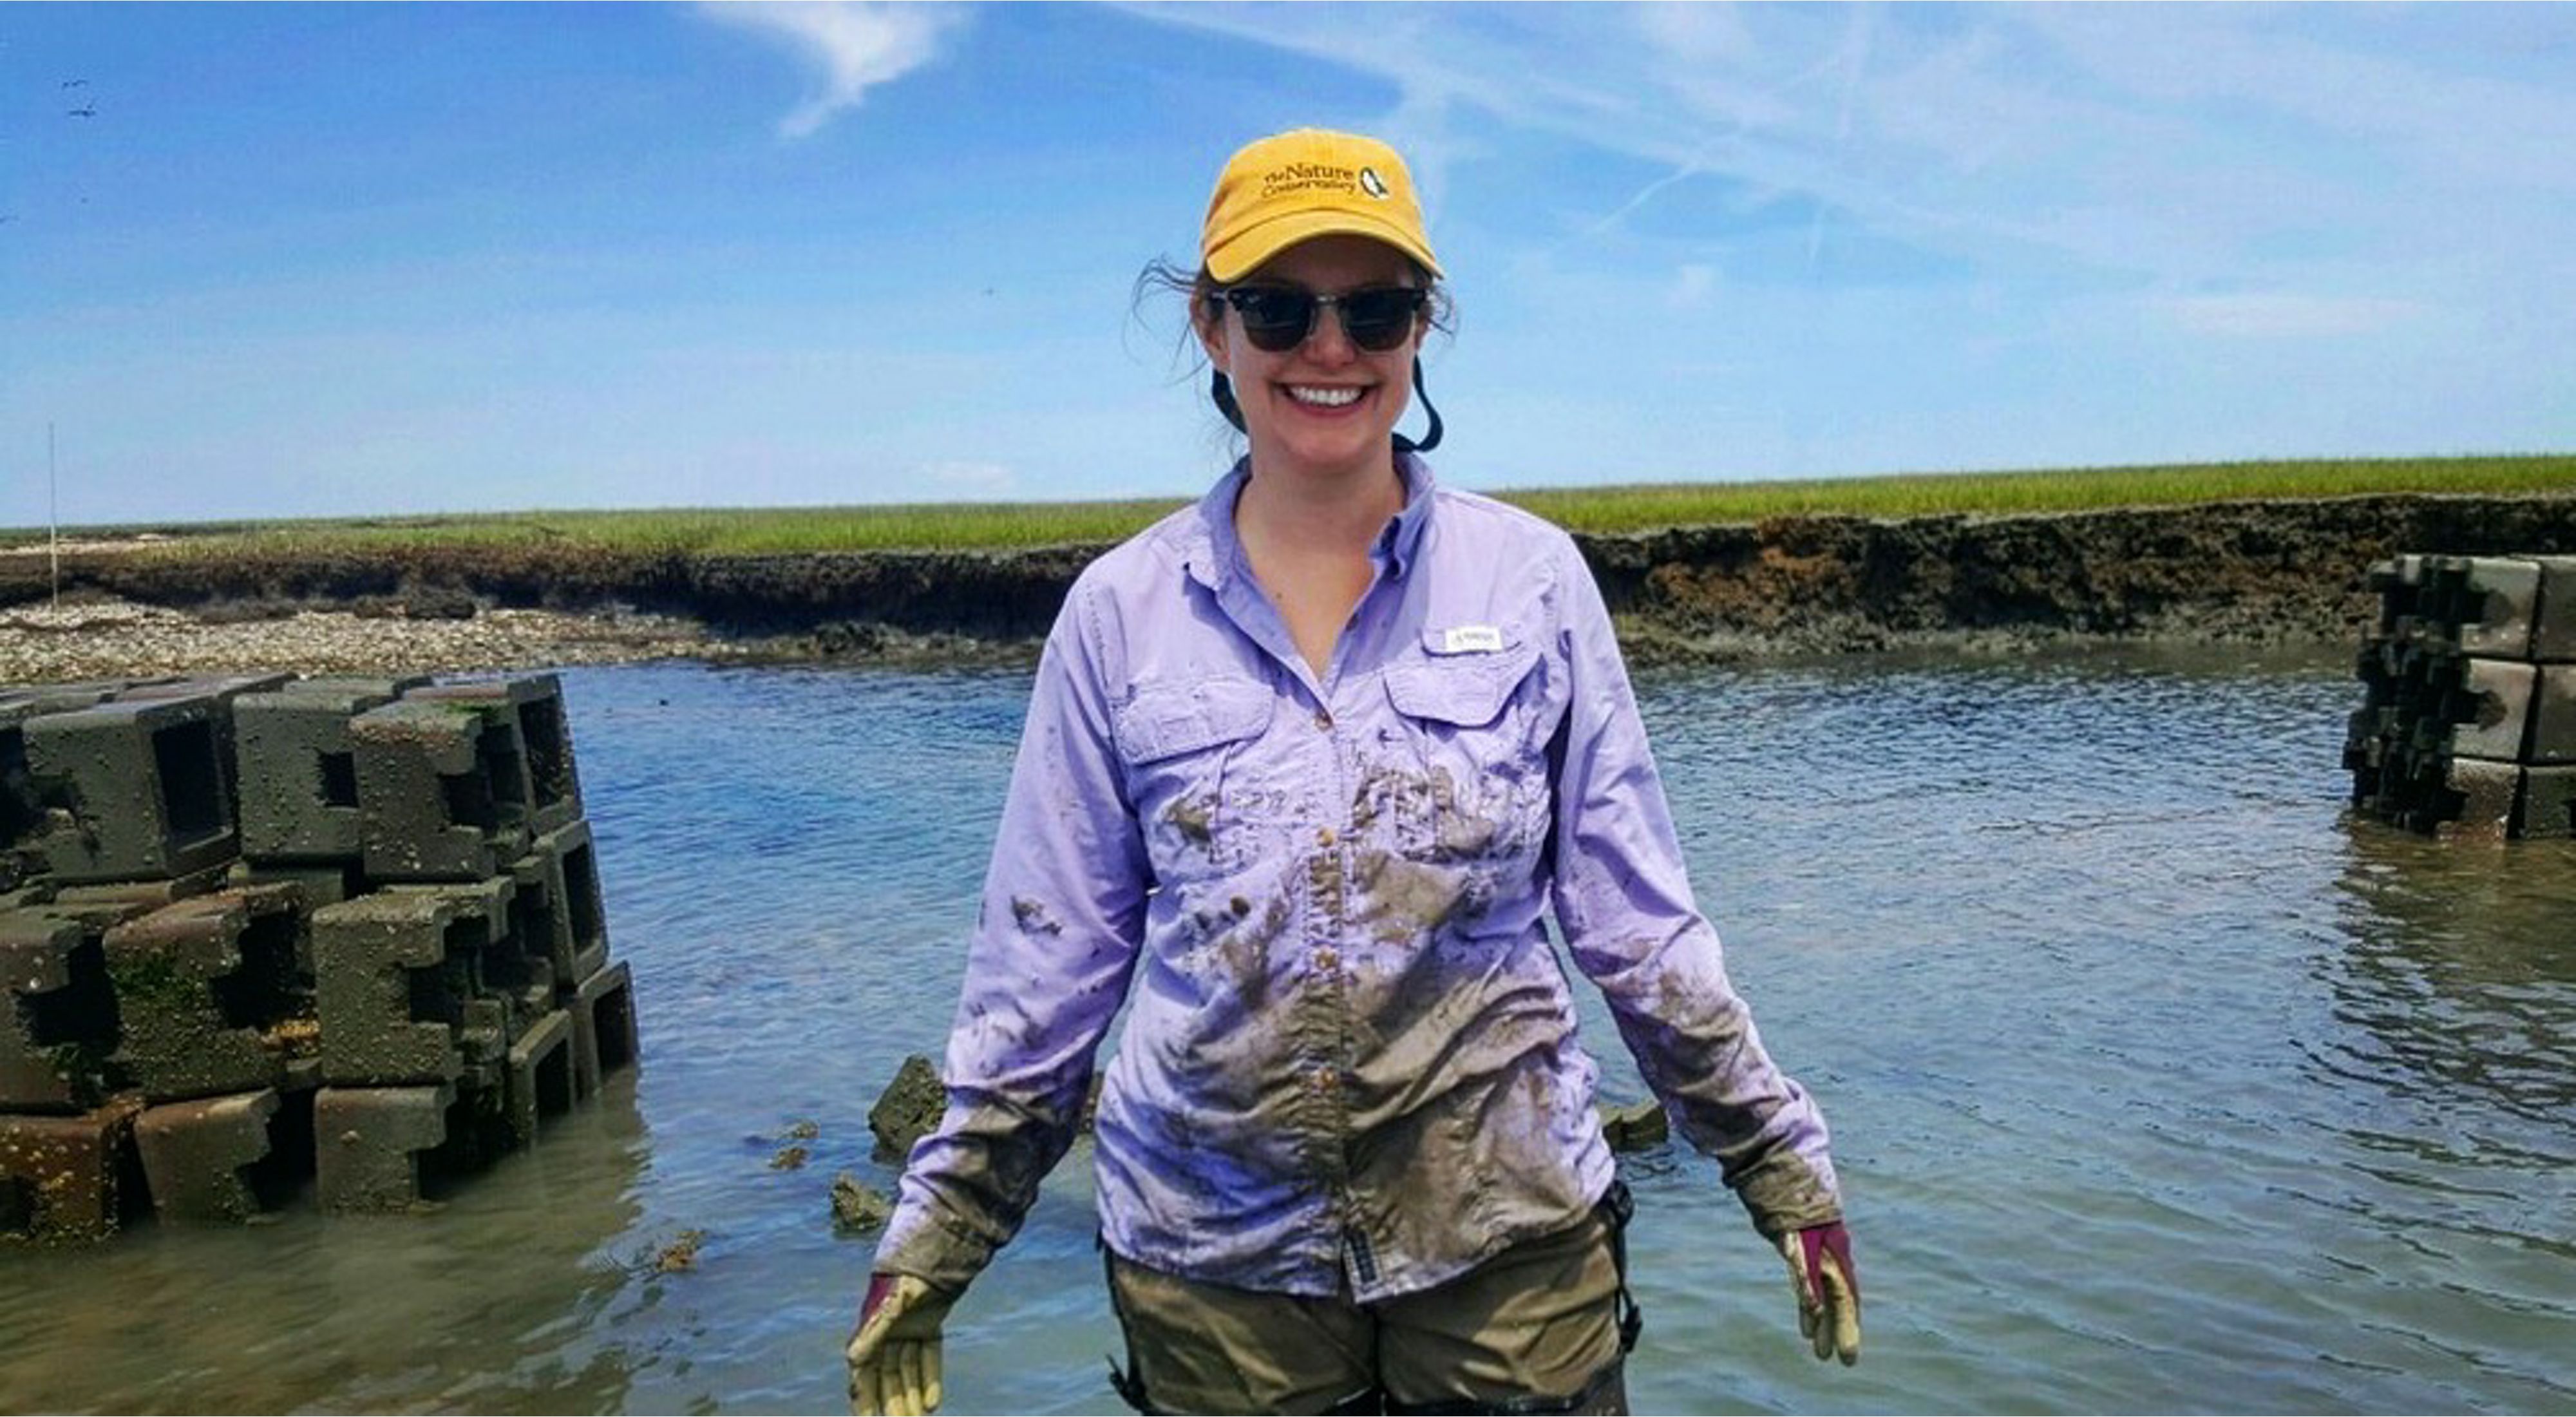 Angelina Stancampiano stands smiling in thigh-deep water with mud on her shirt and hands and oyster castles in the background.